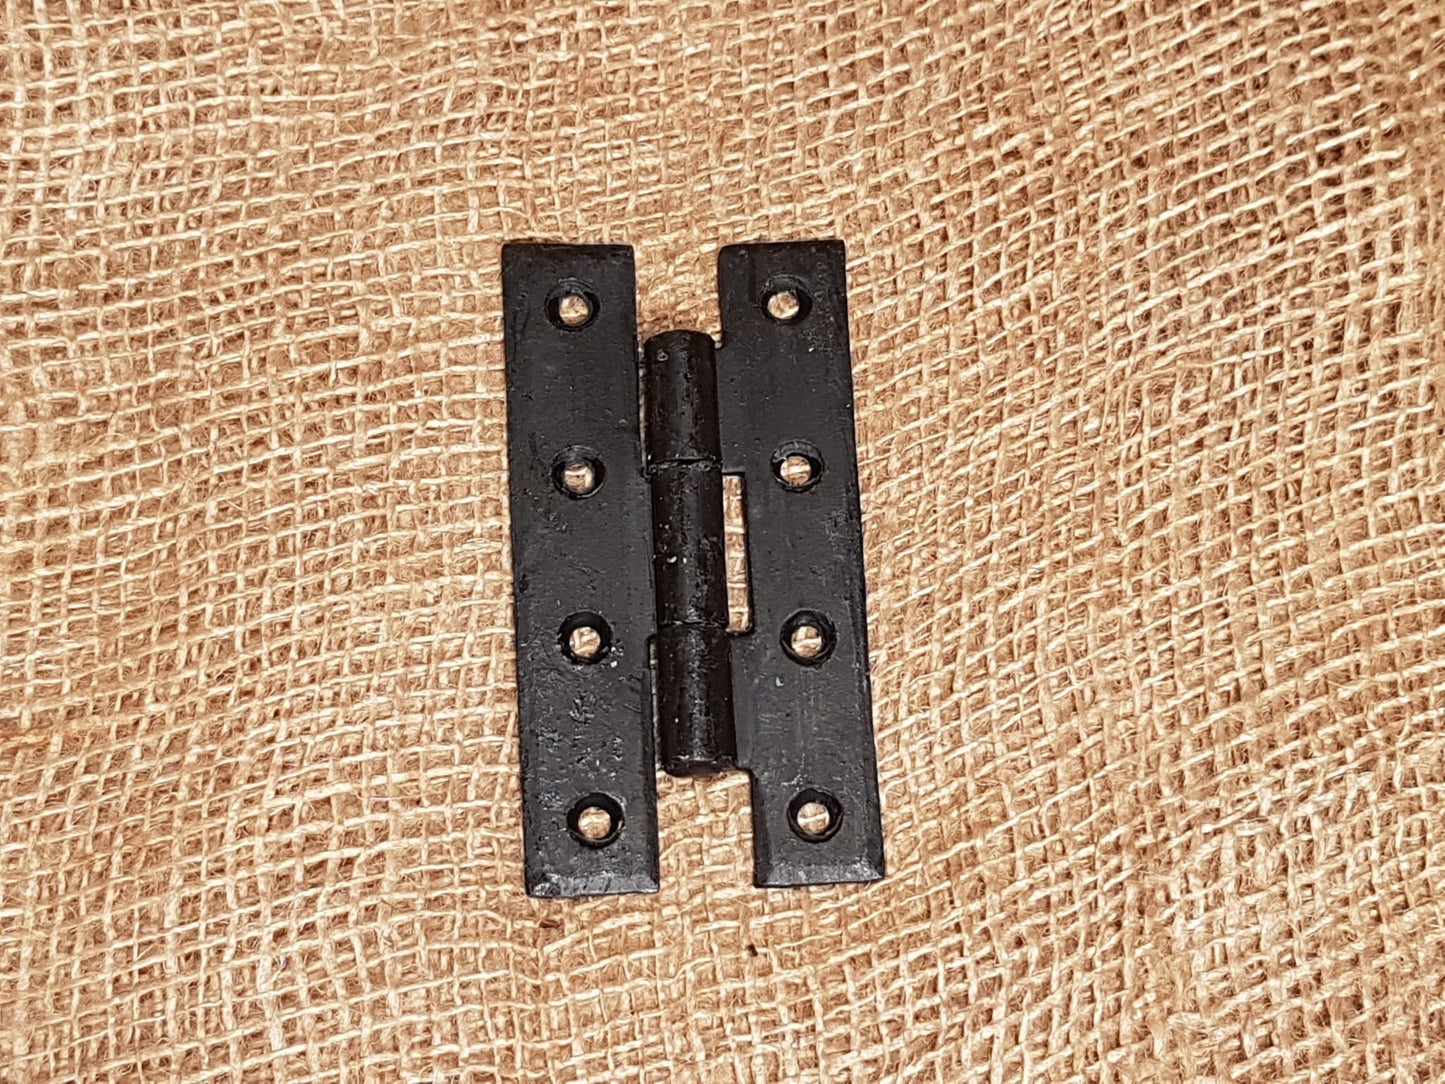 Black Beeswax Hinge - 4" - Spearhead Collection - Hinges - Door Hardware, Hardware, Hinges, Millwork Hardware